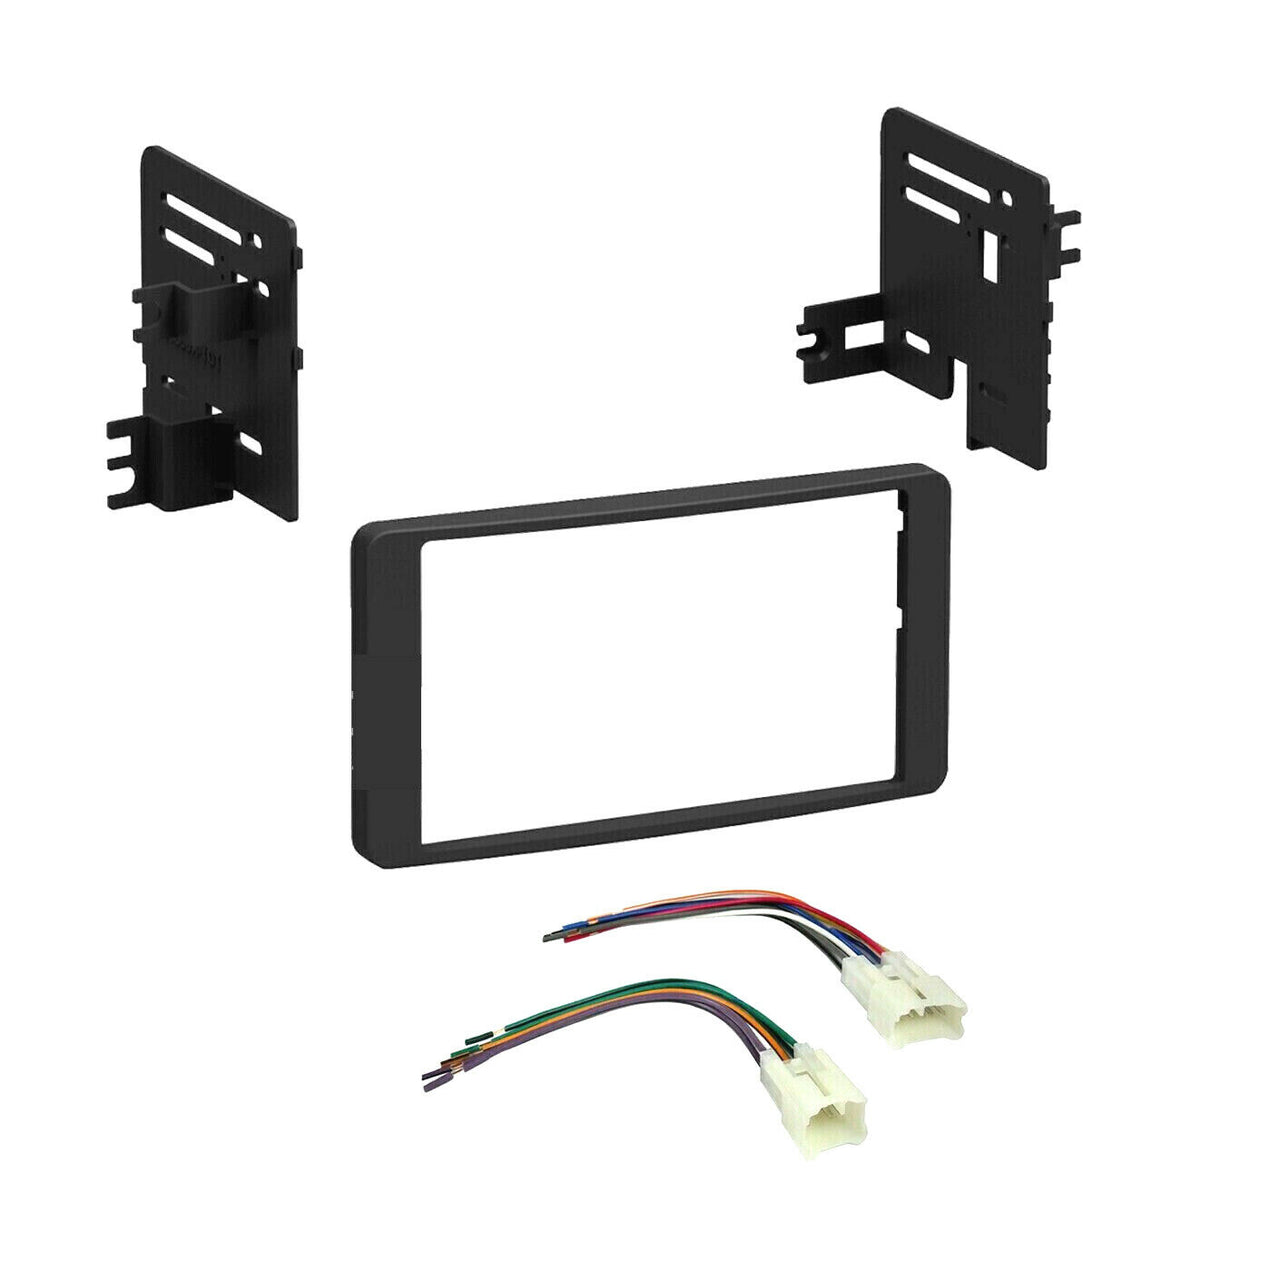 XP Audio Car Radio Stereo Double Din Dash Kit for & Harness 2003-2007 Toyota Tundra Sequoia